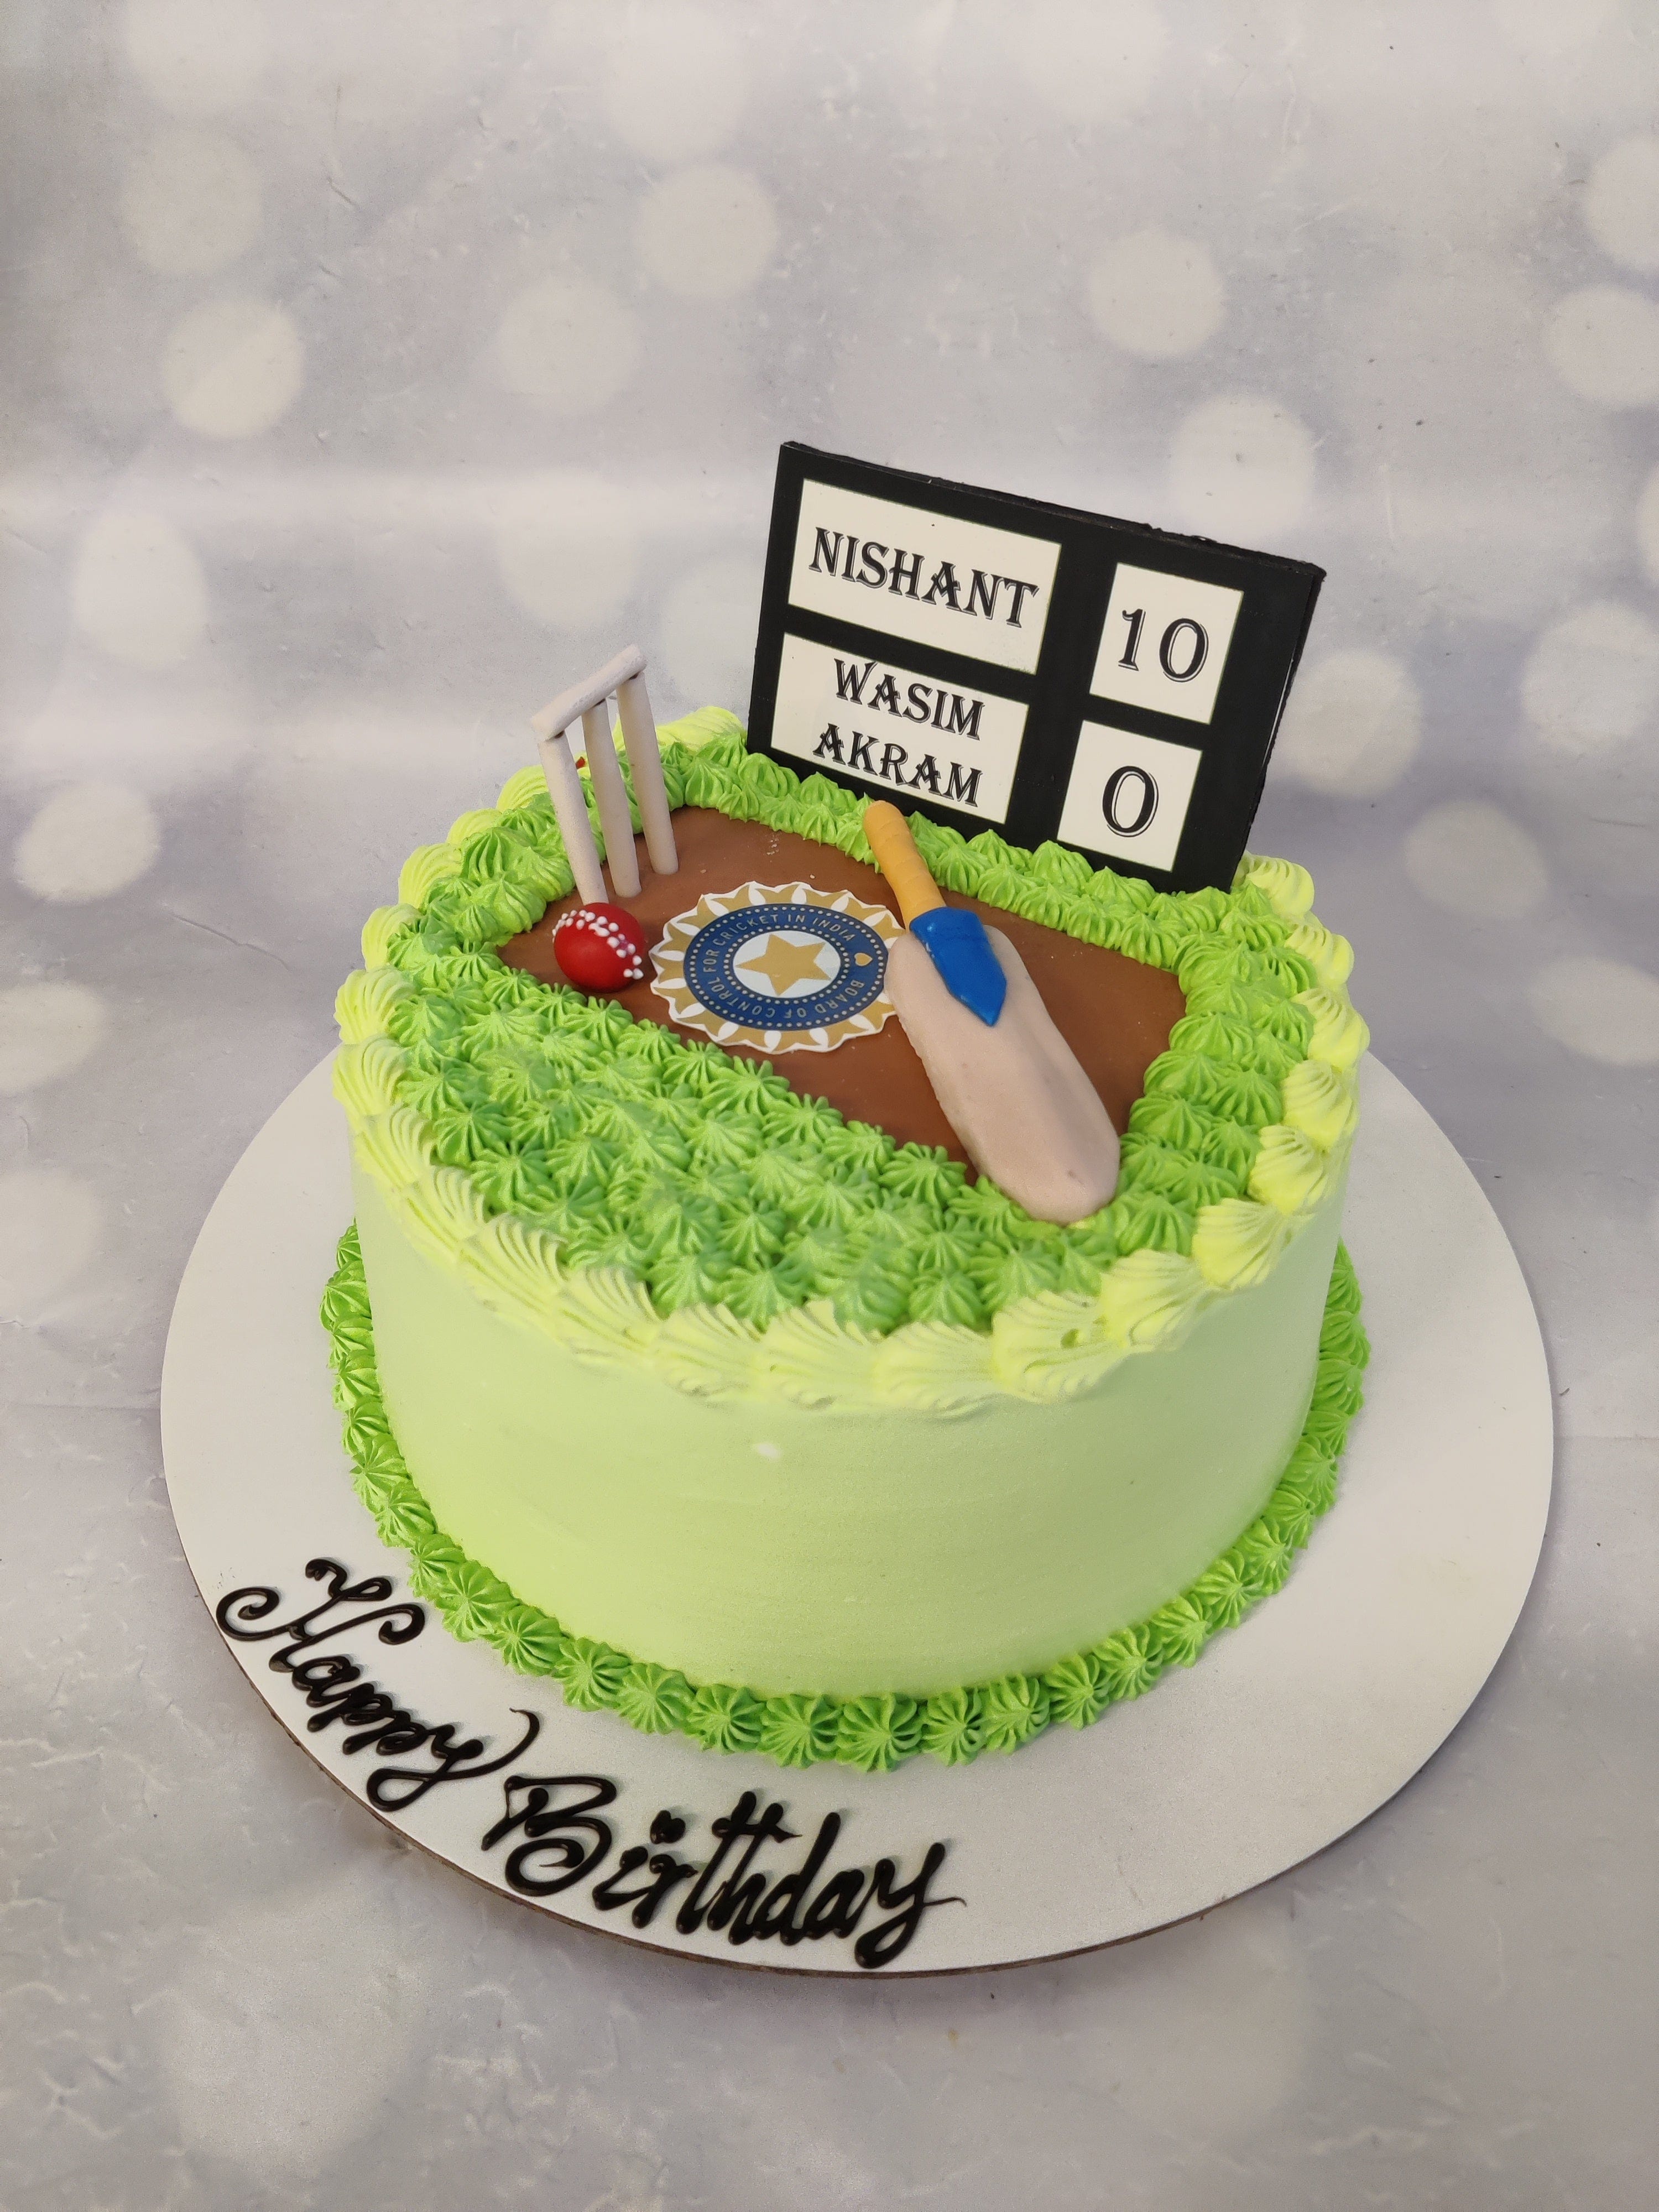 Order Cricket Cake Online from 100+ Designs - CakenGifts